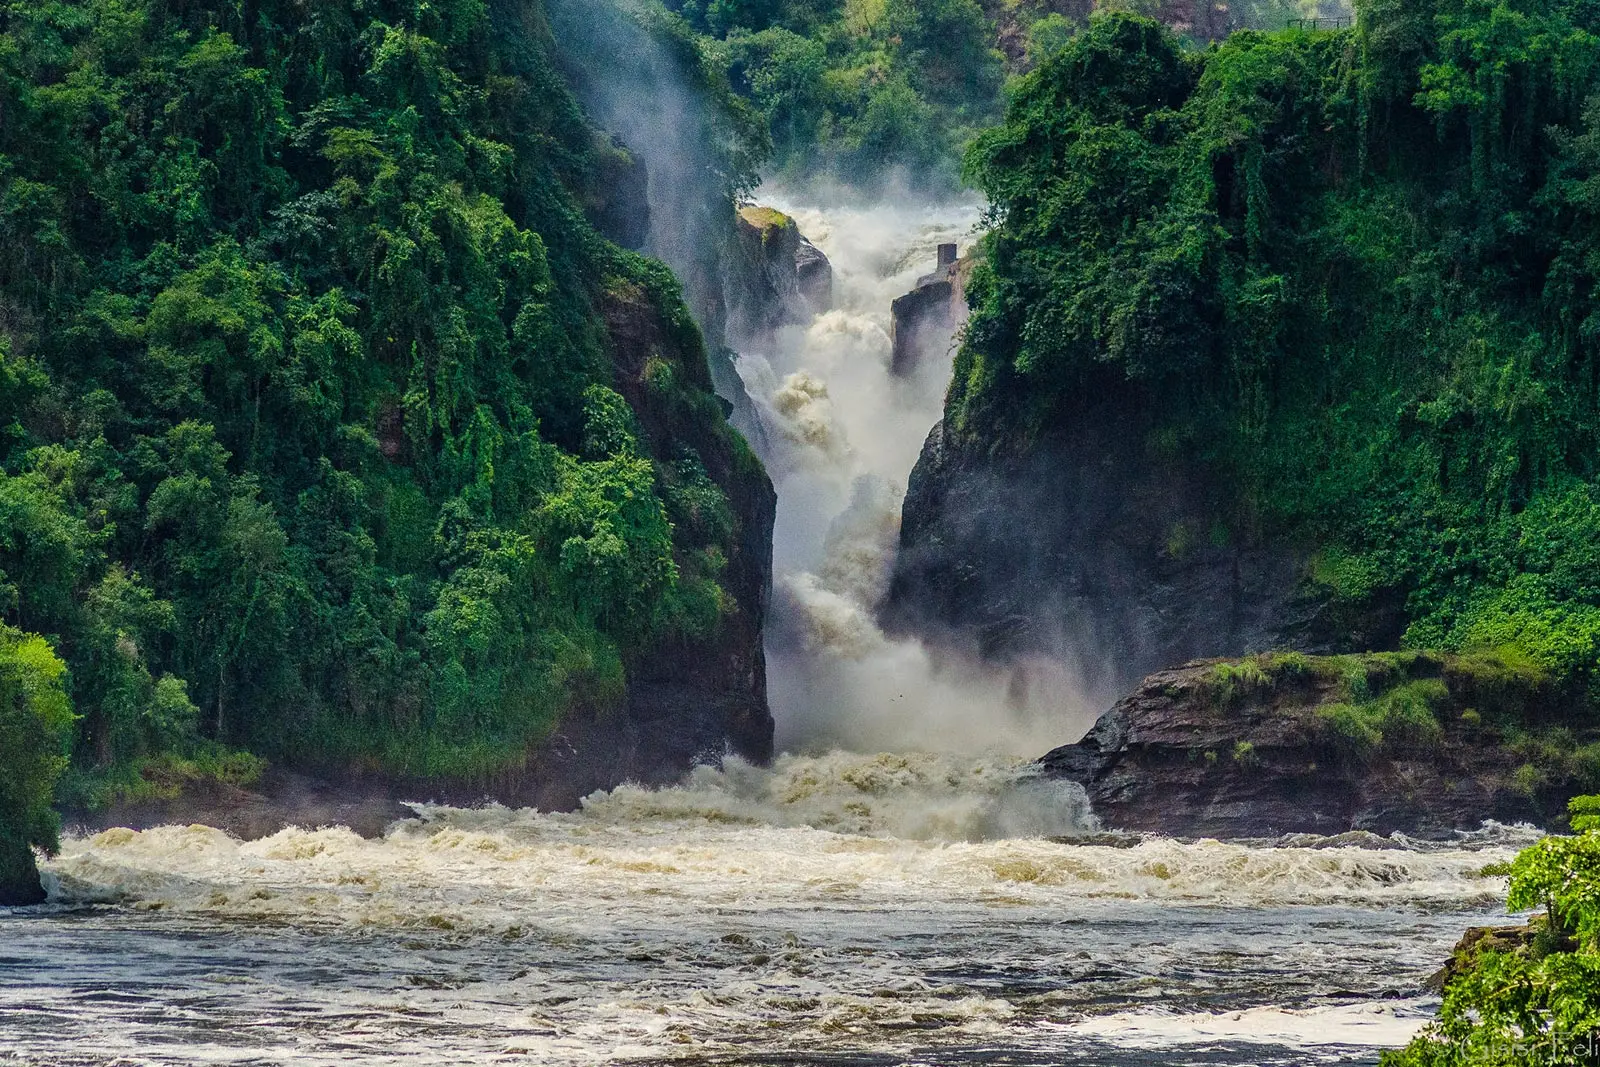 MURCHISON FALLS NATIONAL PARK “THE WOLRDS MOST POWERFUL WATERFALL”